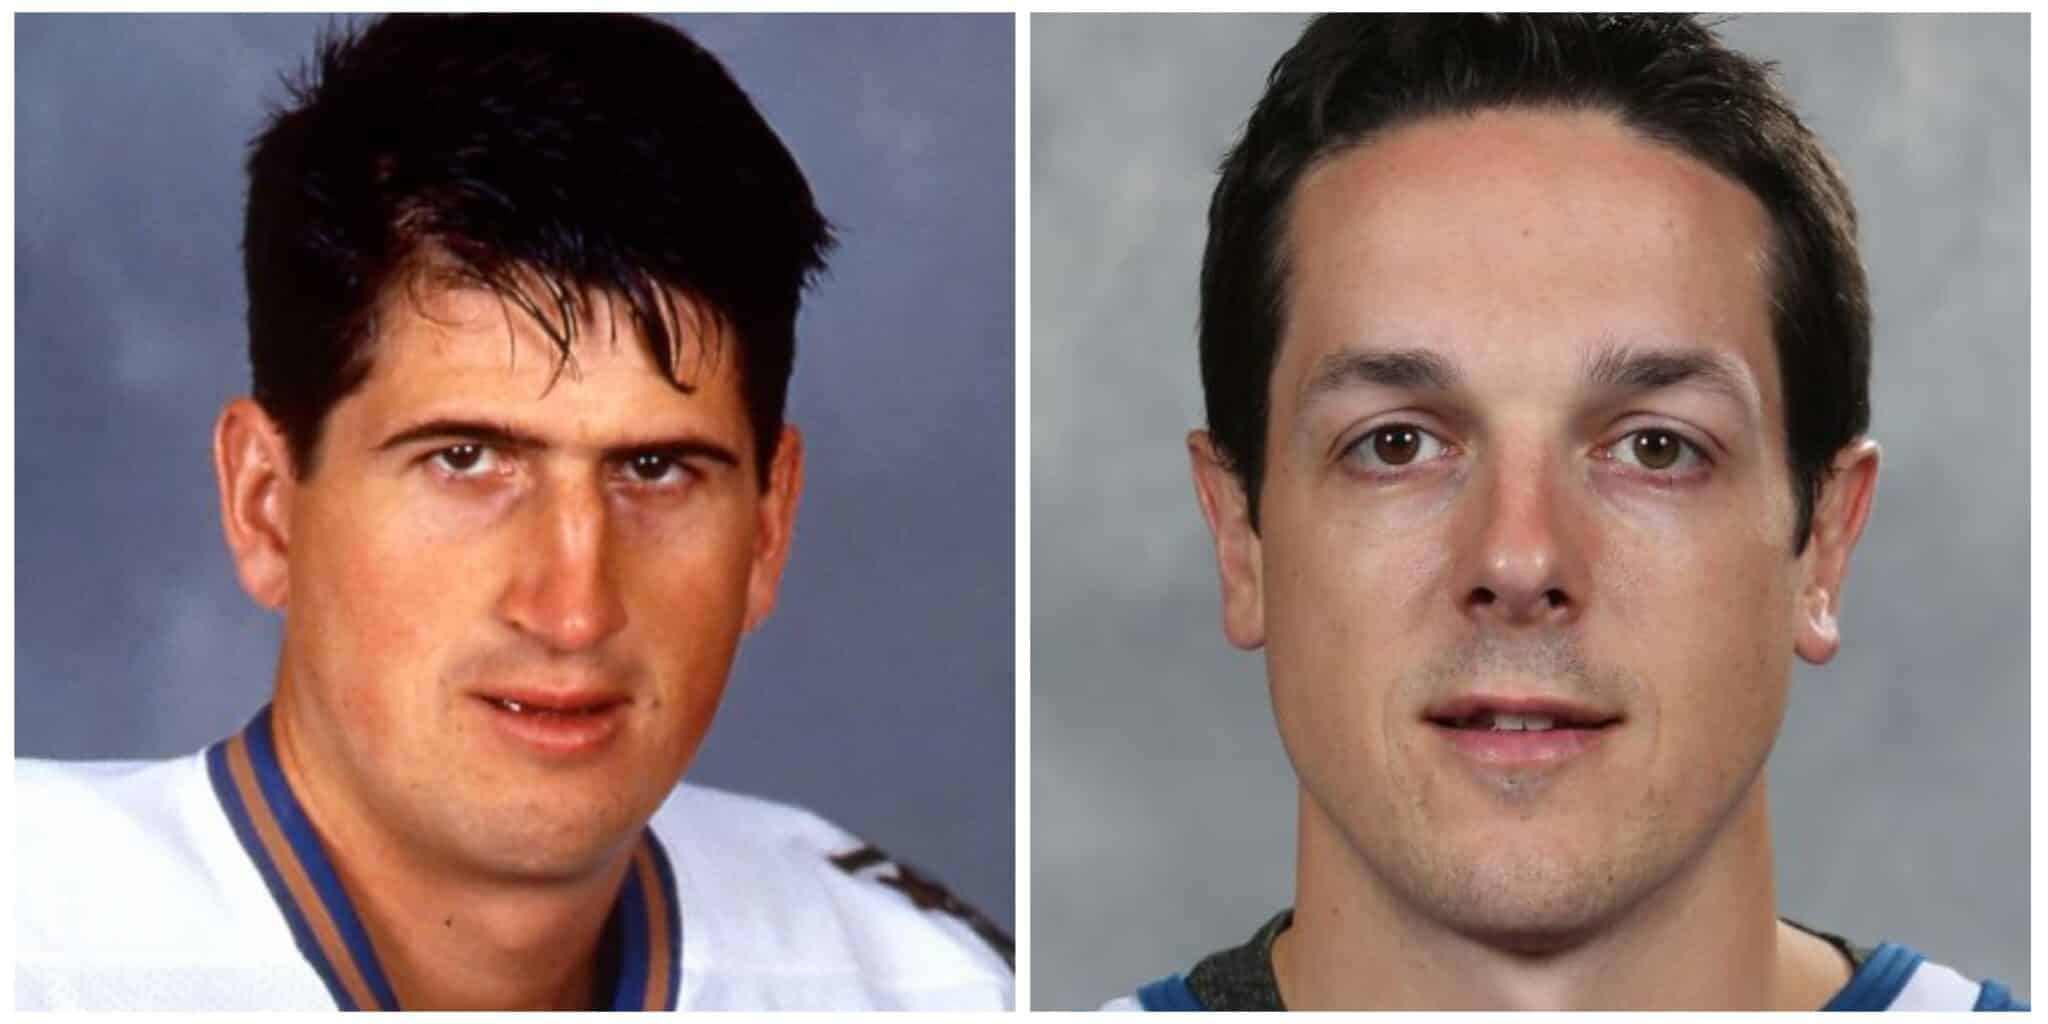 Officially Official: Keith Jones and Danny Briere to Lead Flyers’ Rebuild